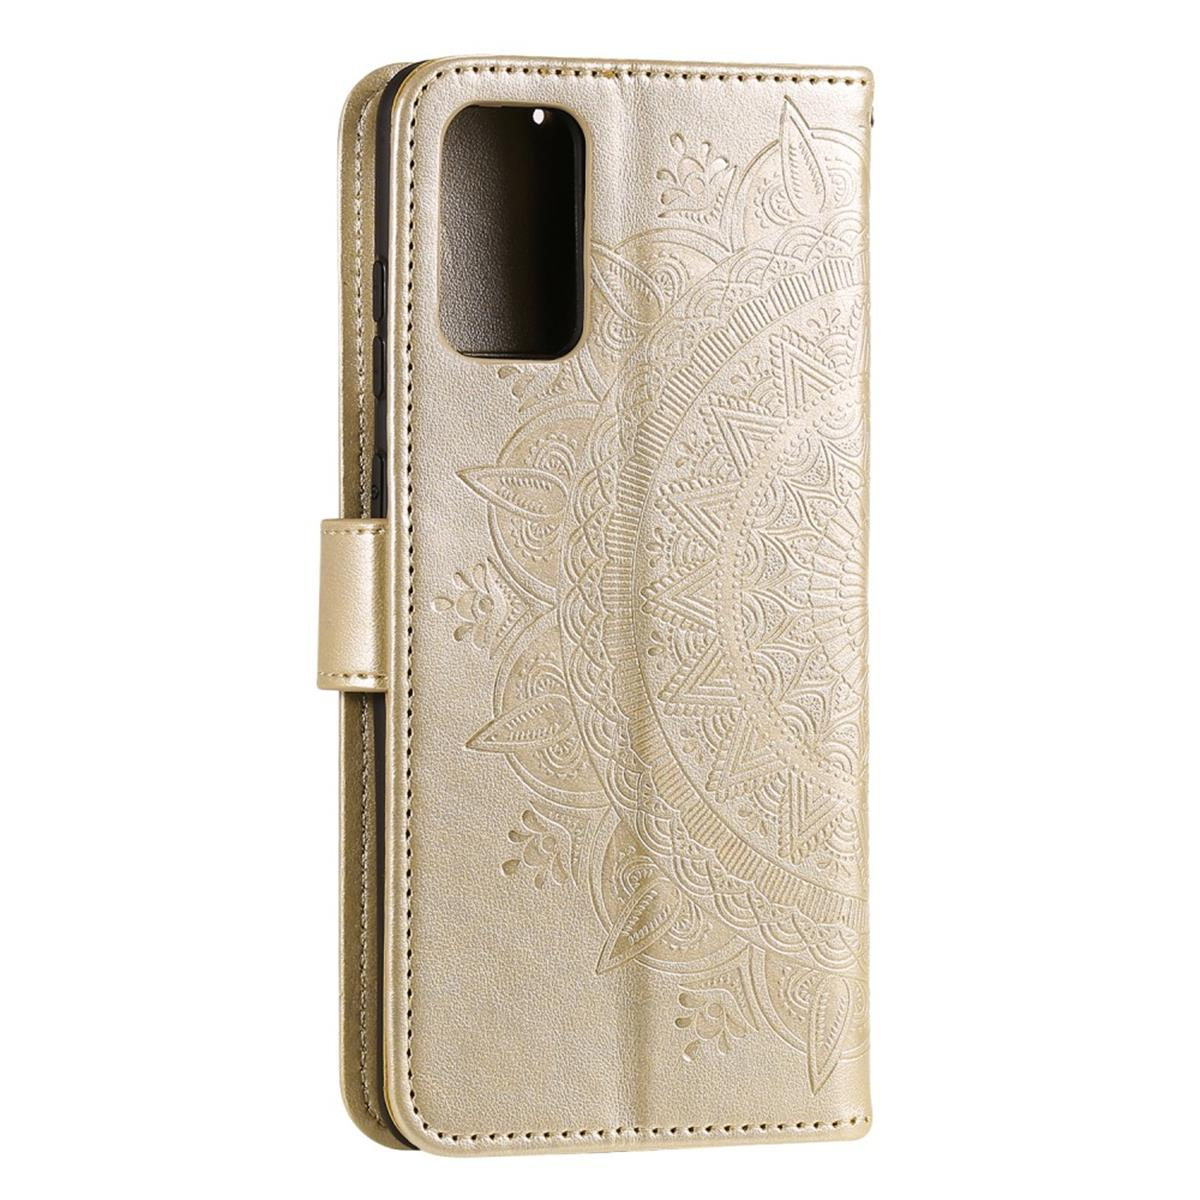 Galaxy Muster, S20 Klapphülle mit Gold FE, Mandala COVERKINGZ Samsung, Bookcover,